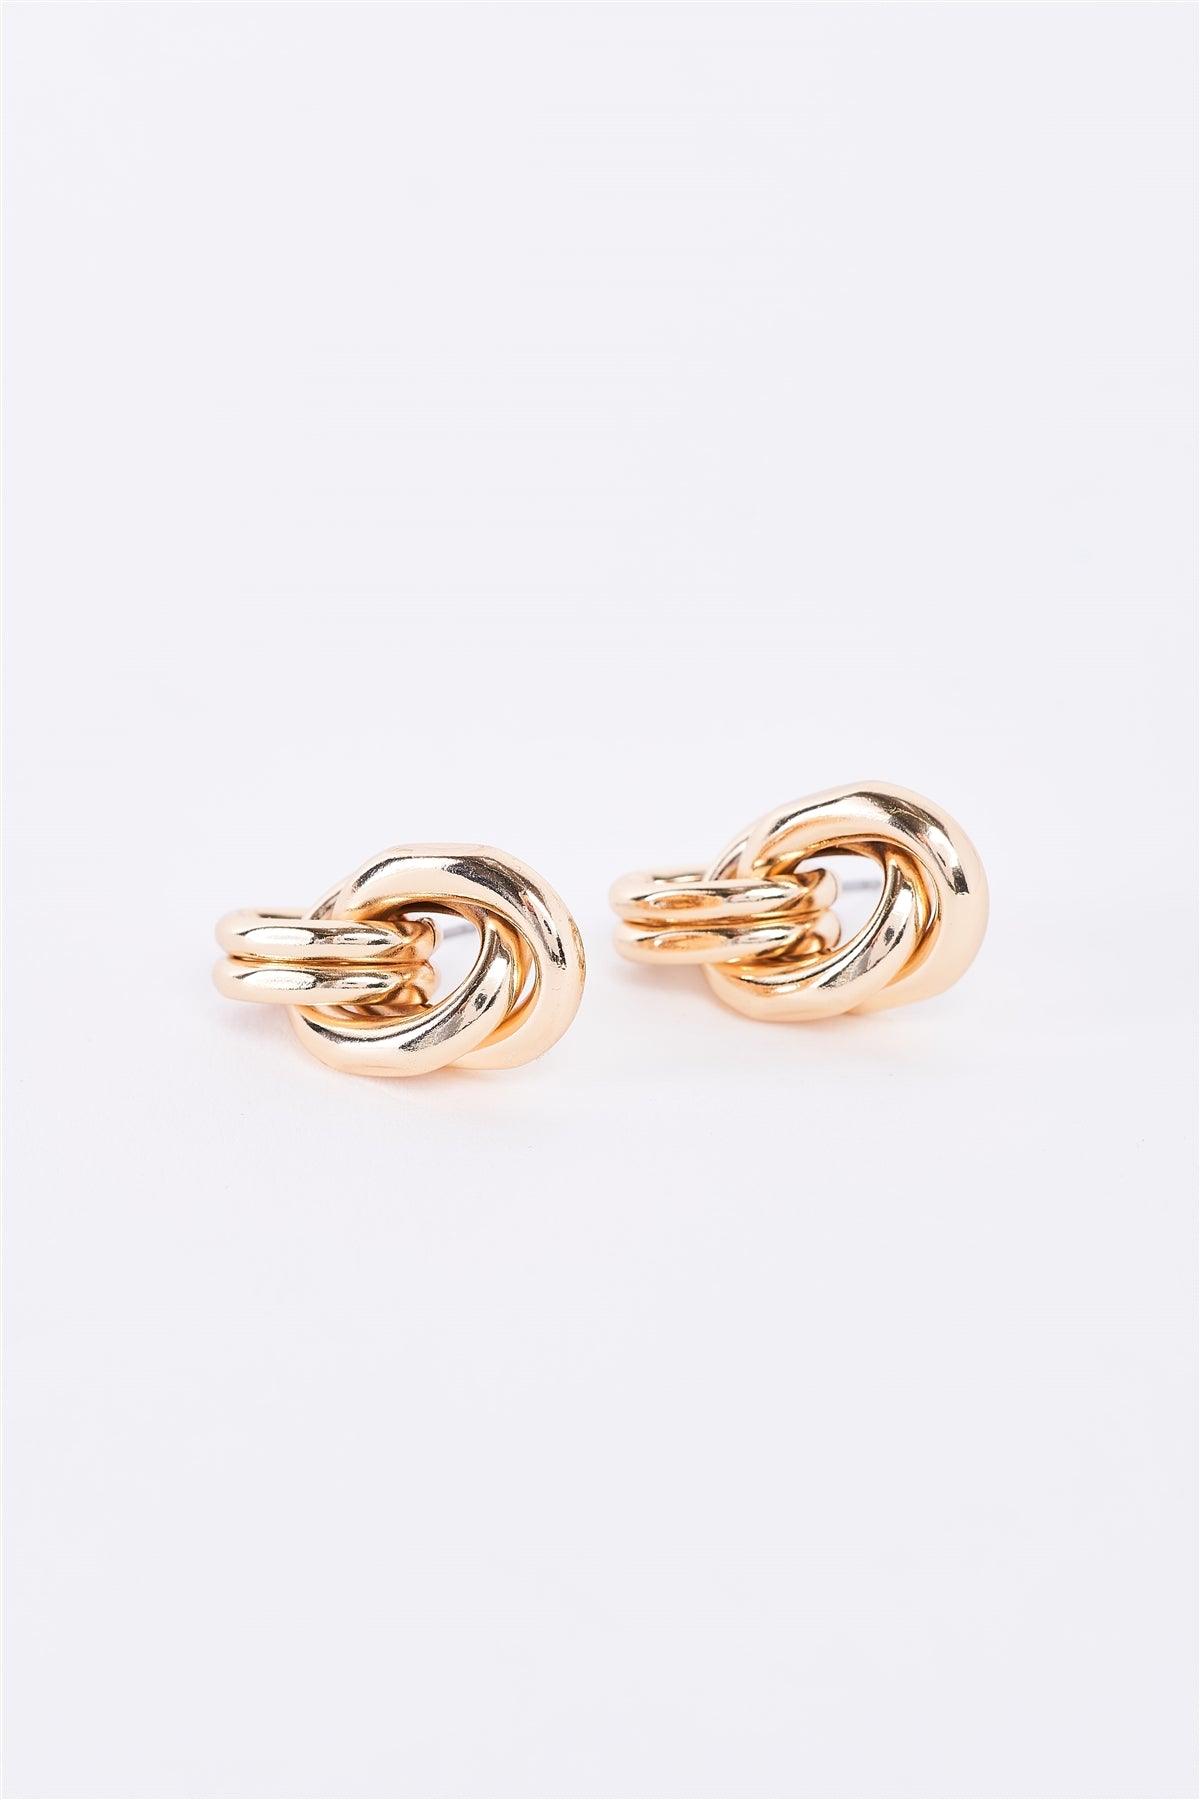 Gold Double Chain Link Stud Earrings /3 Pairs